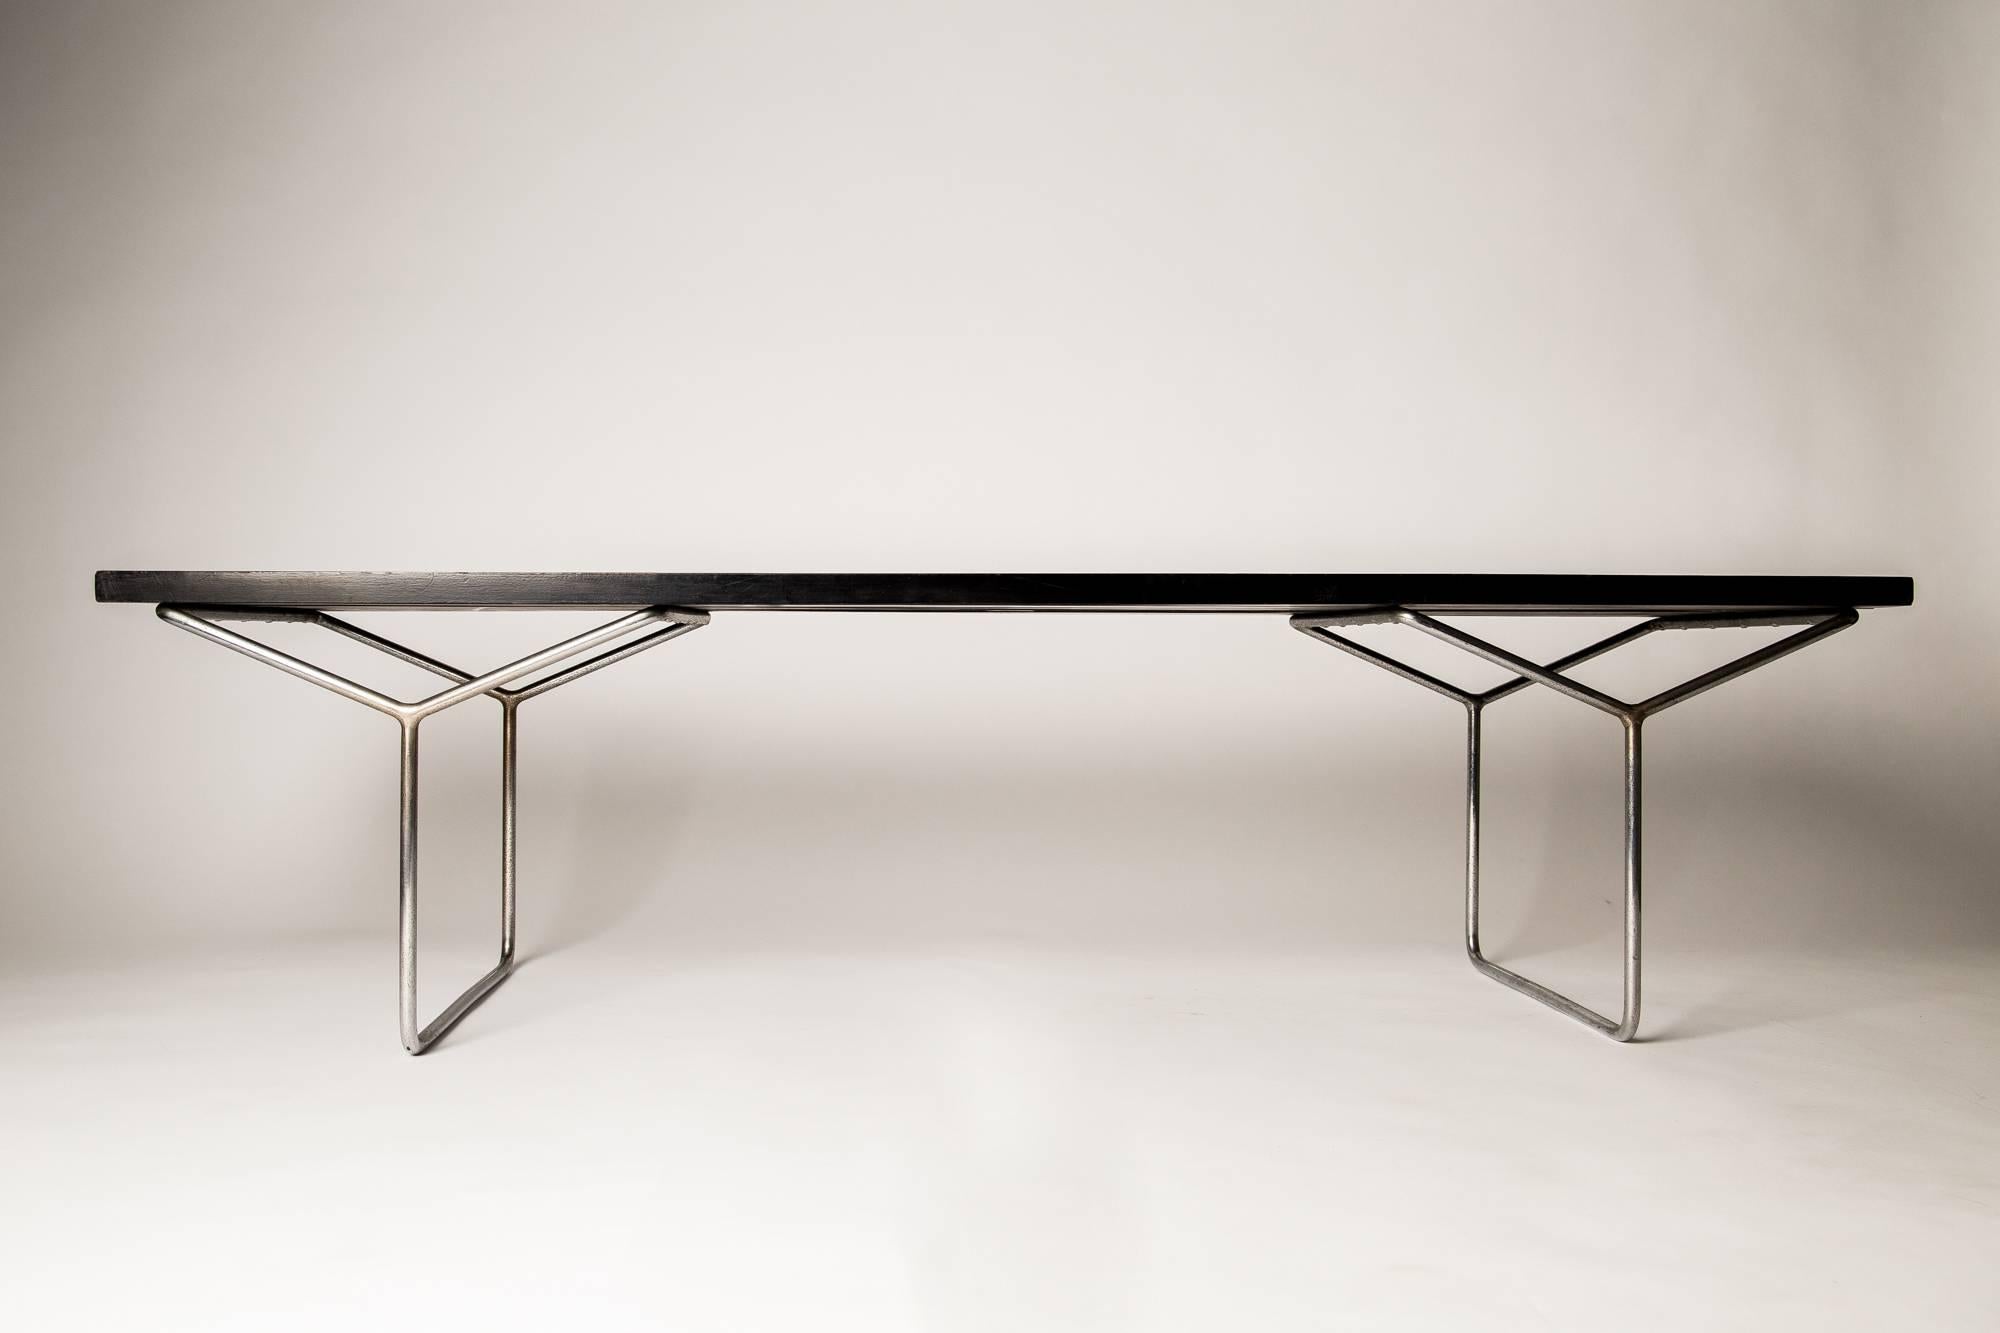 With tubular metal frame and lacquered wood top. Original metal plate label - Pizzetti, Industria Della Poltrona, Roma

Architectural in design, ideal as either coffee table or bench.